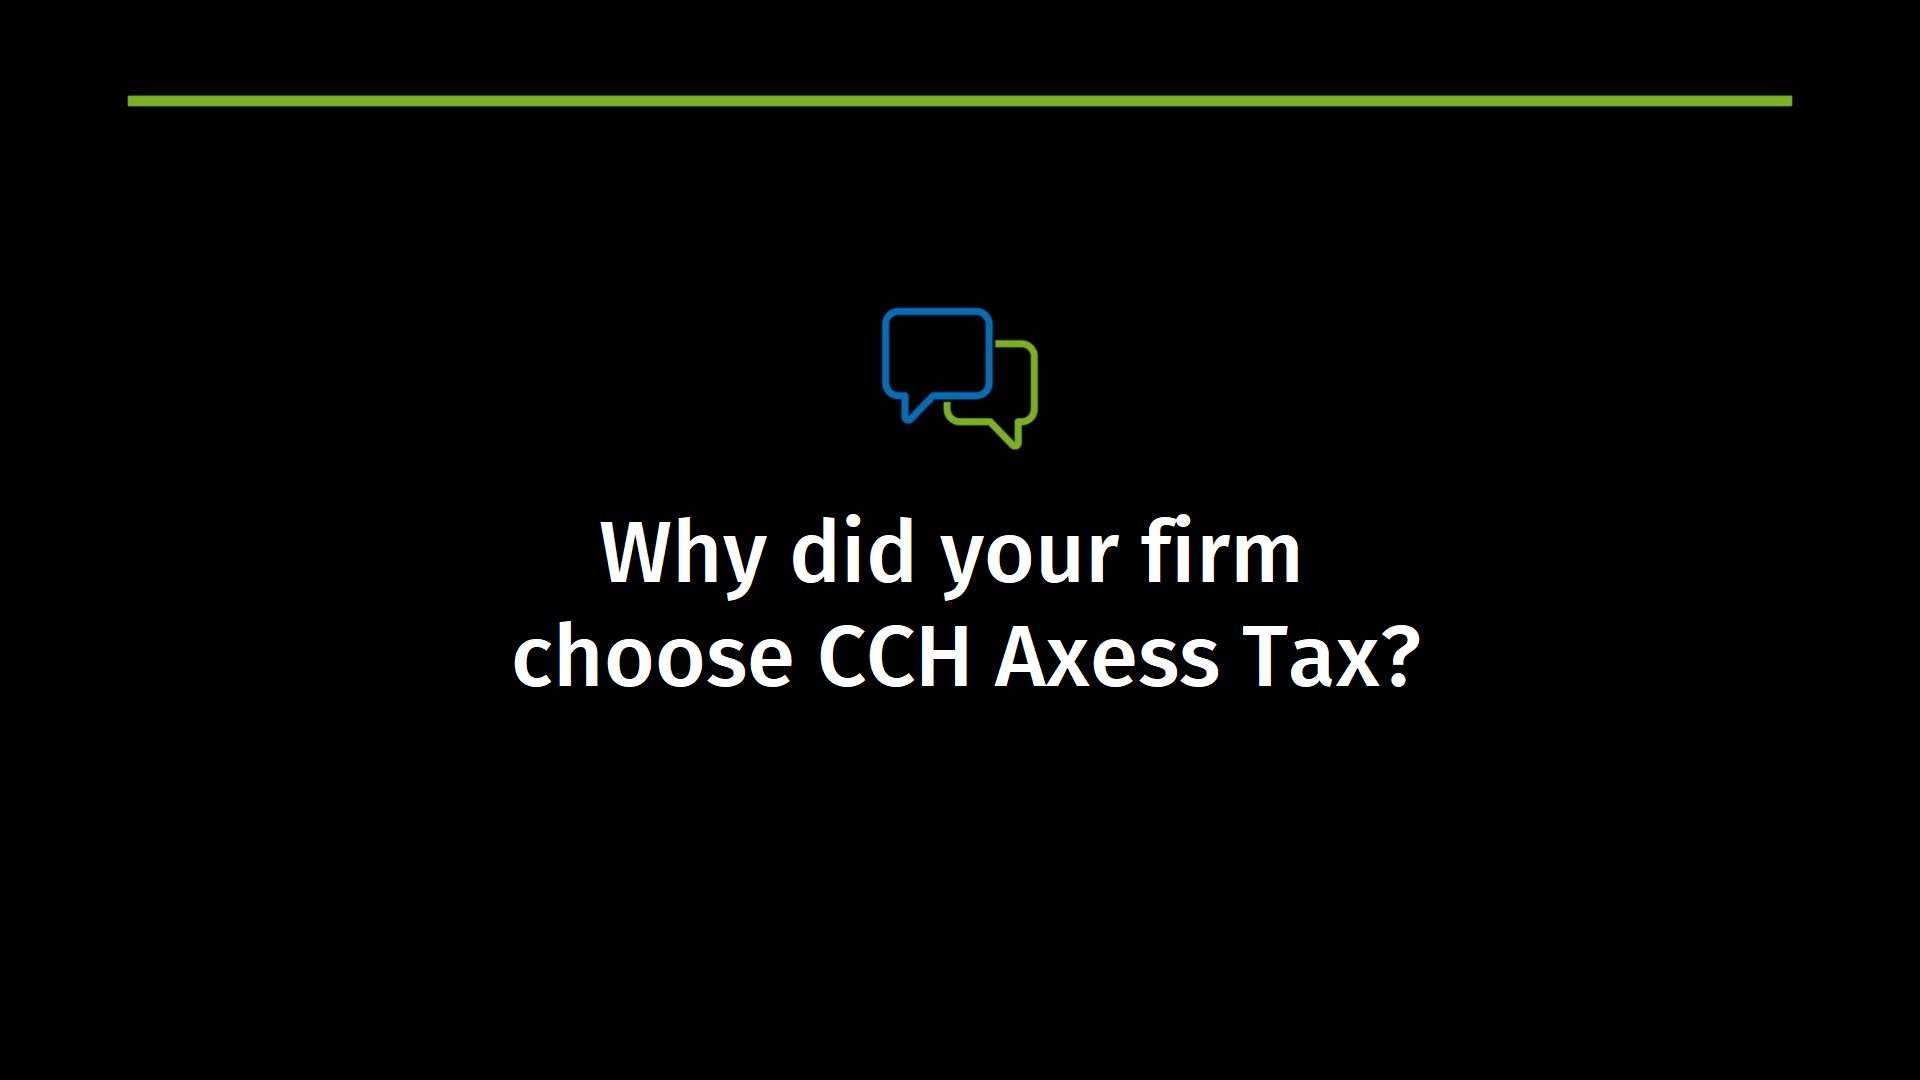 Why did your firm choose CCH Axcess Tax?